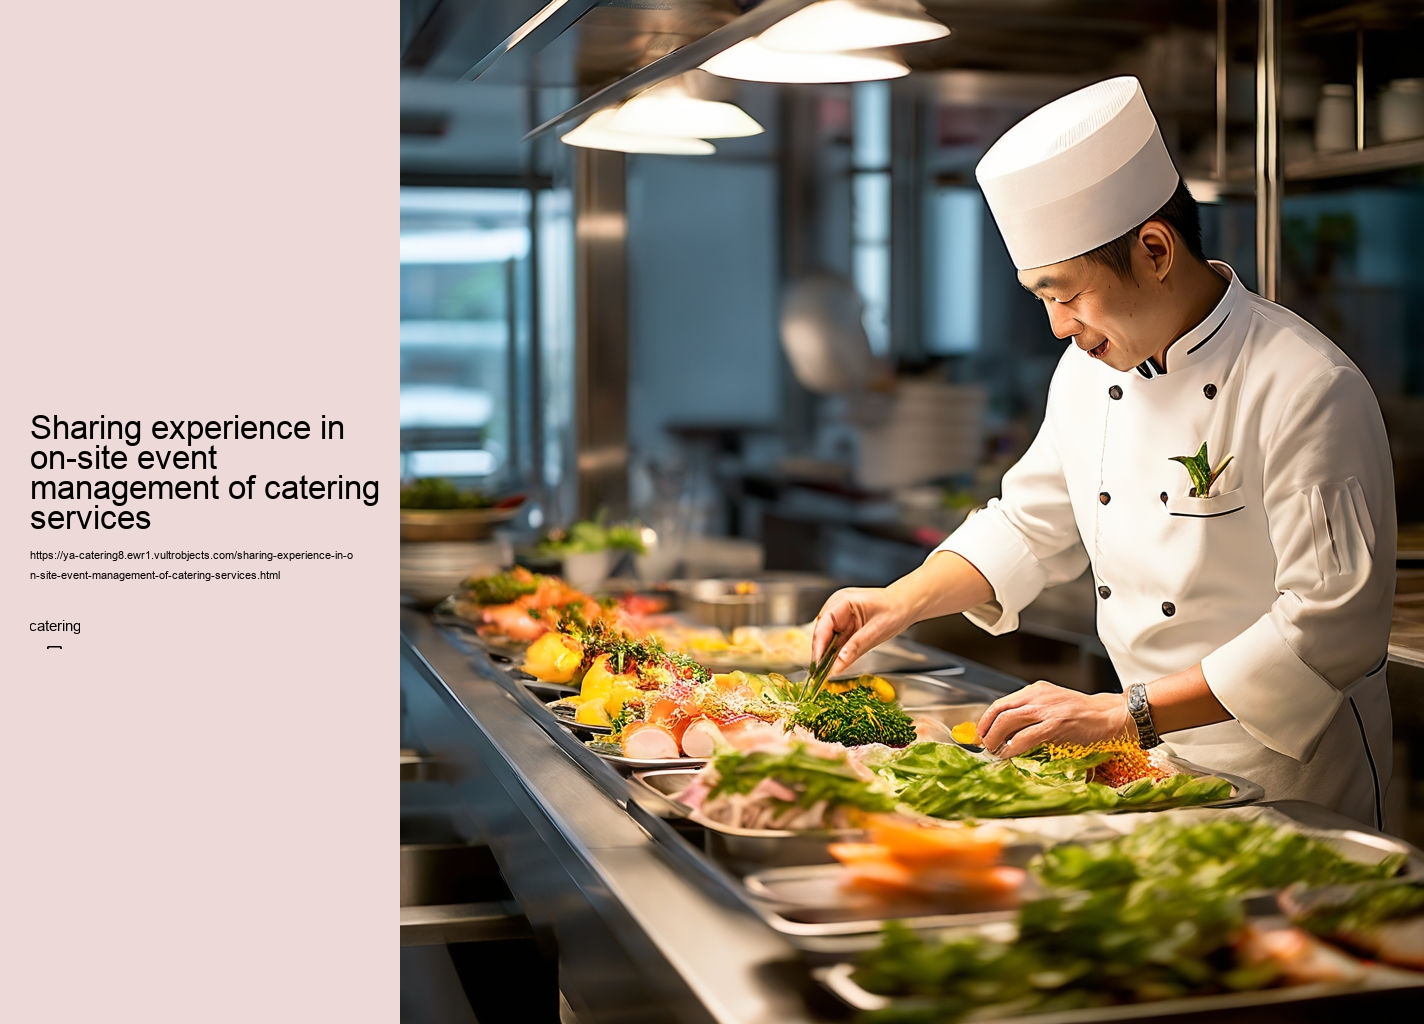 Sharing experience in on-site event management of catering services